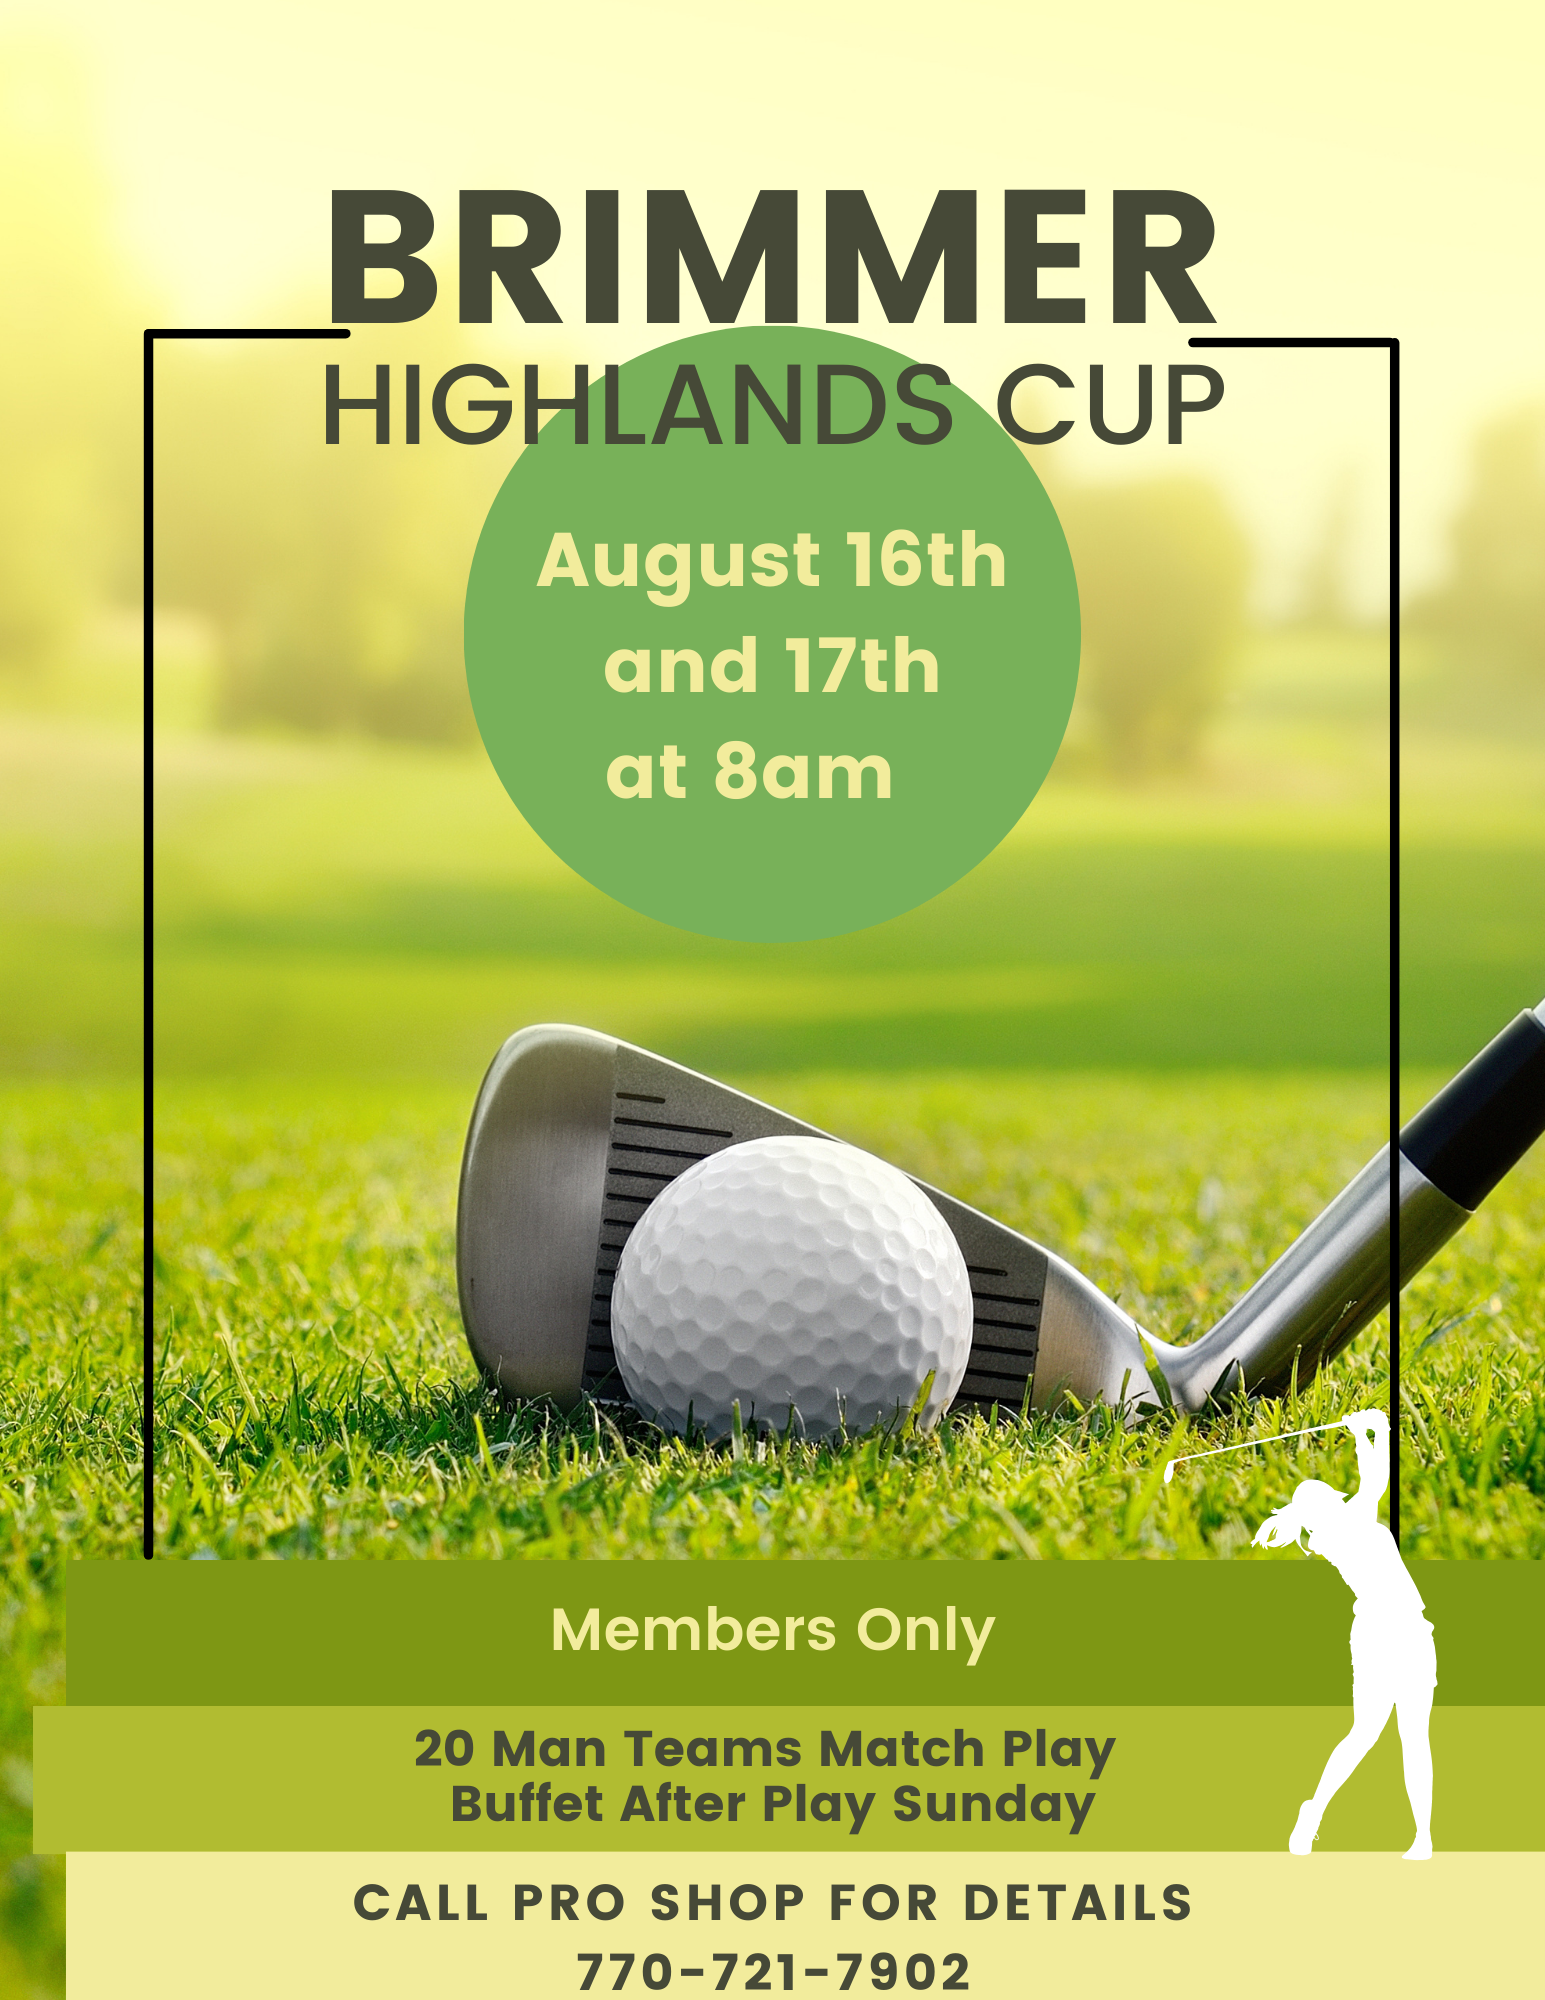 Brimmer Highlands Cup August 16th and 17th